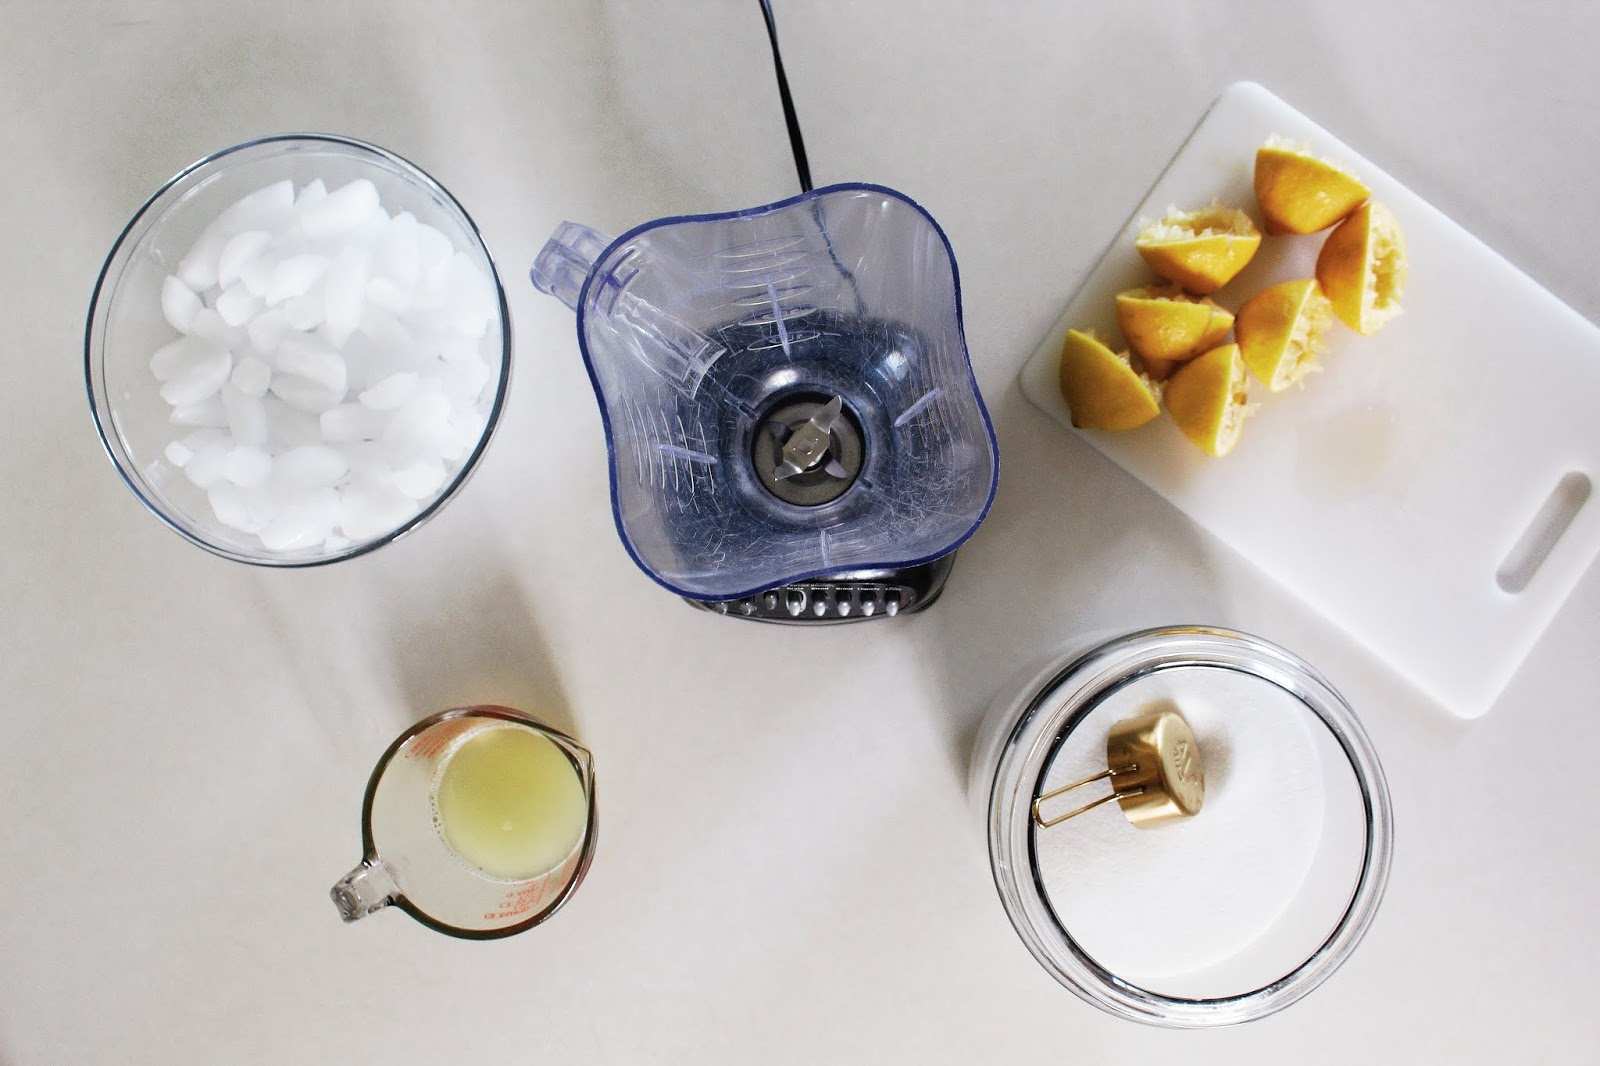 Frozen cocktails themselves make a powerful blender